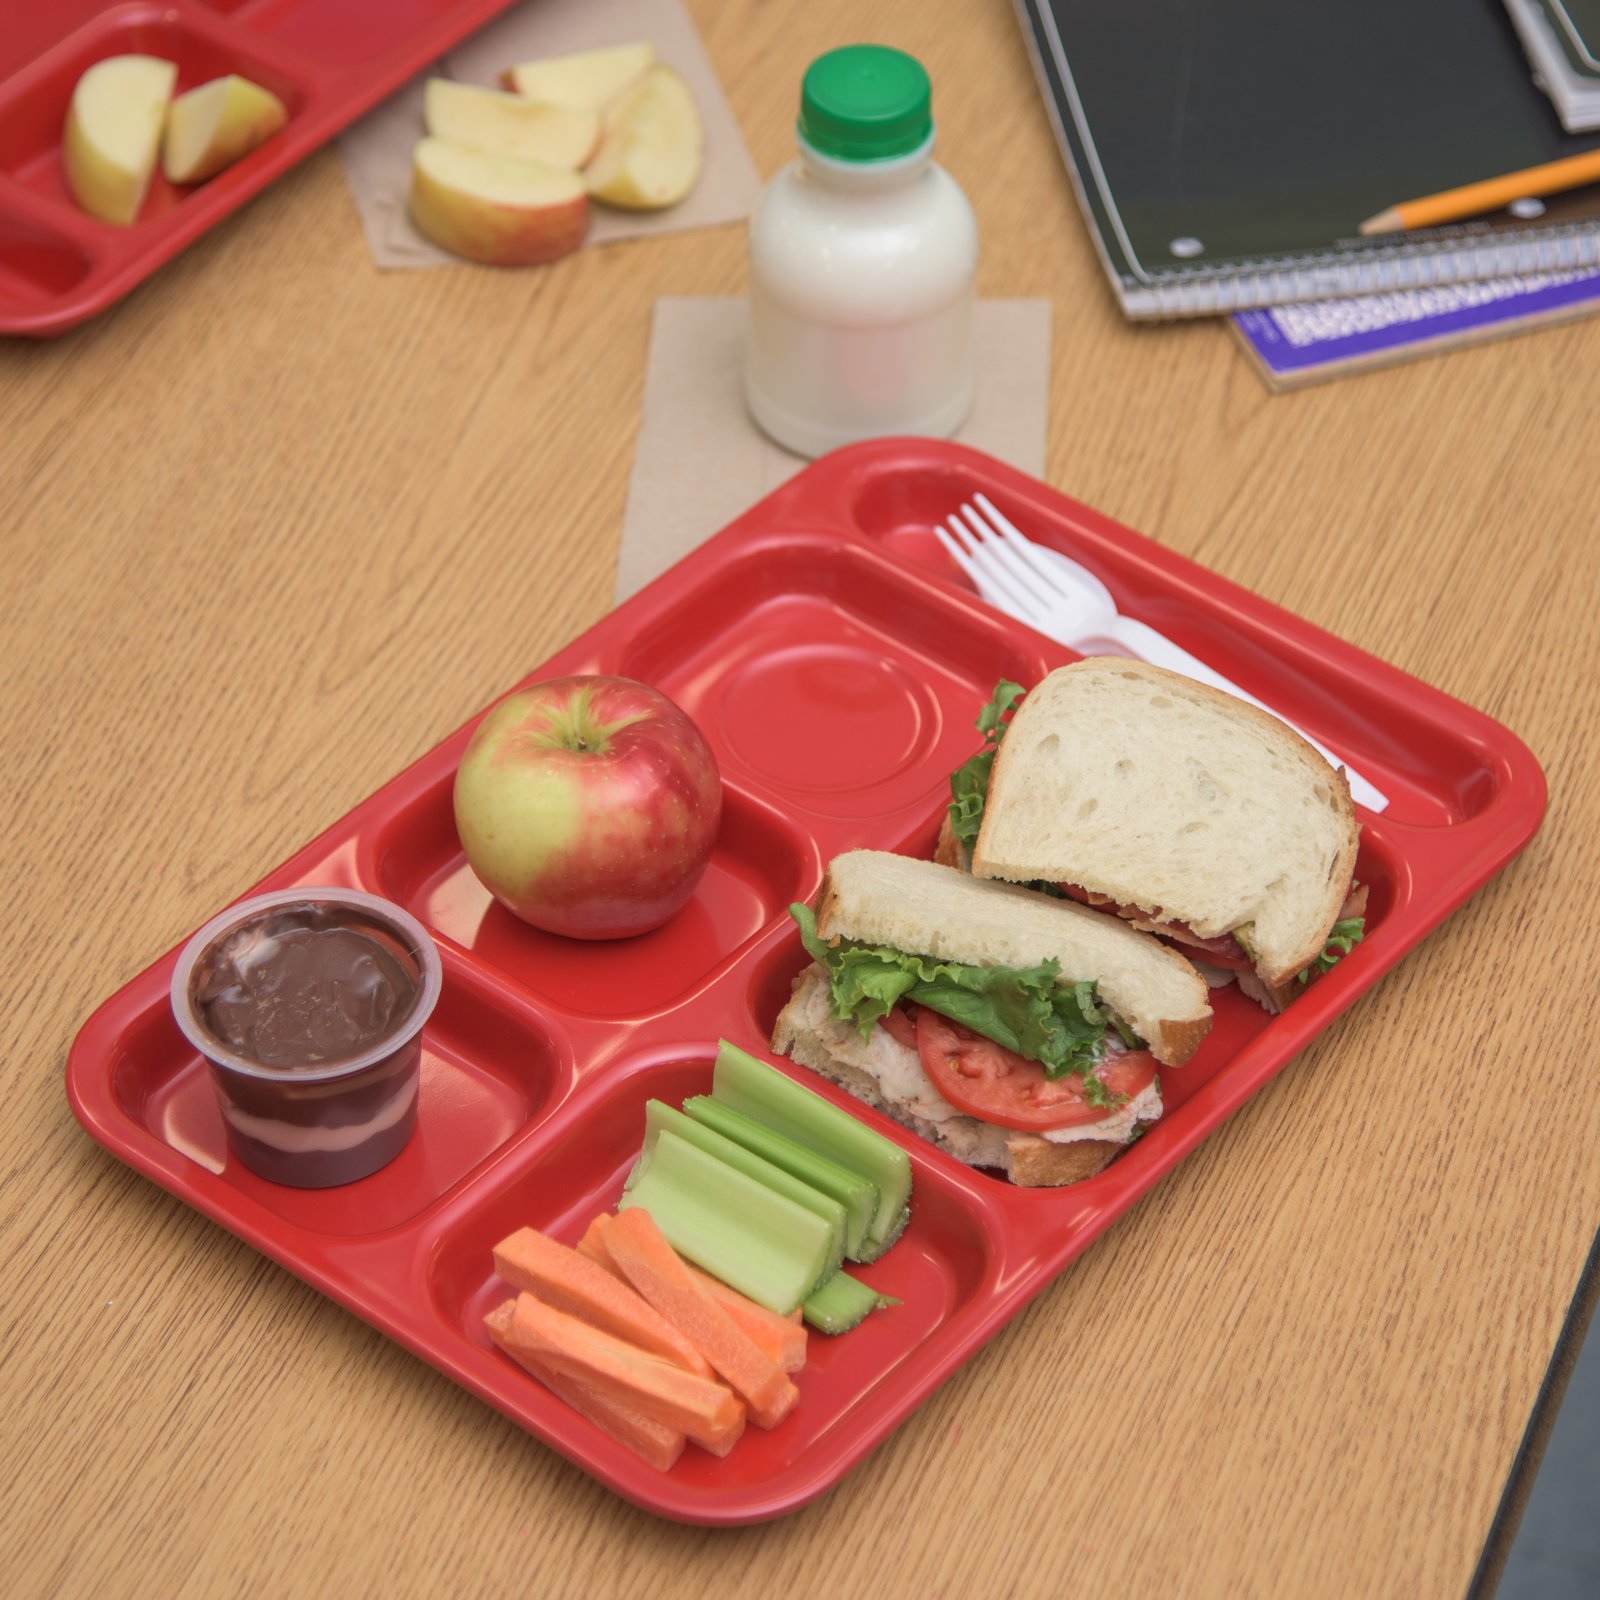 3 Cmpt Lunchable Tray 6544 Natural